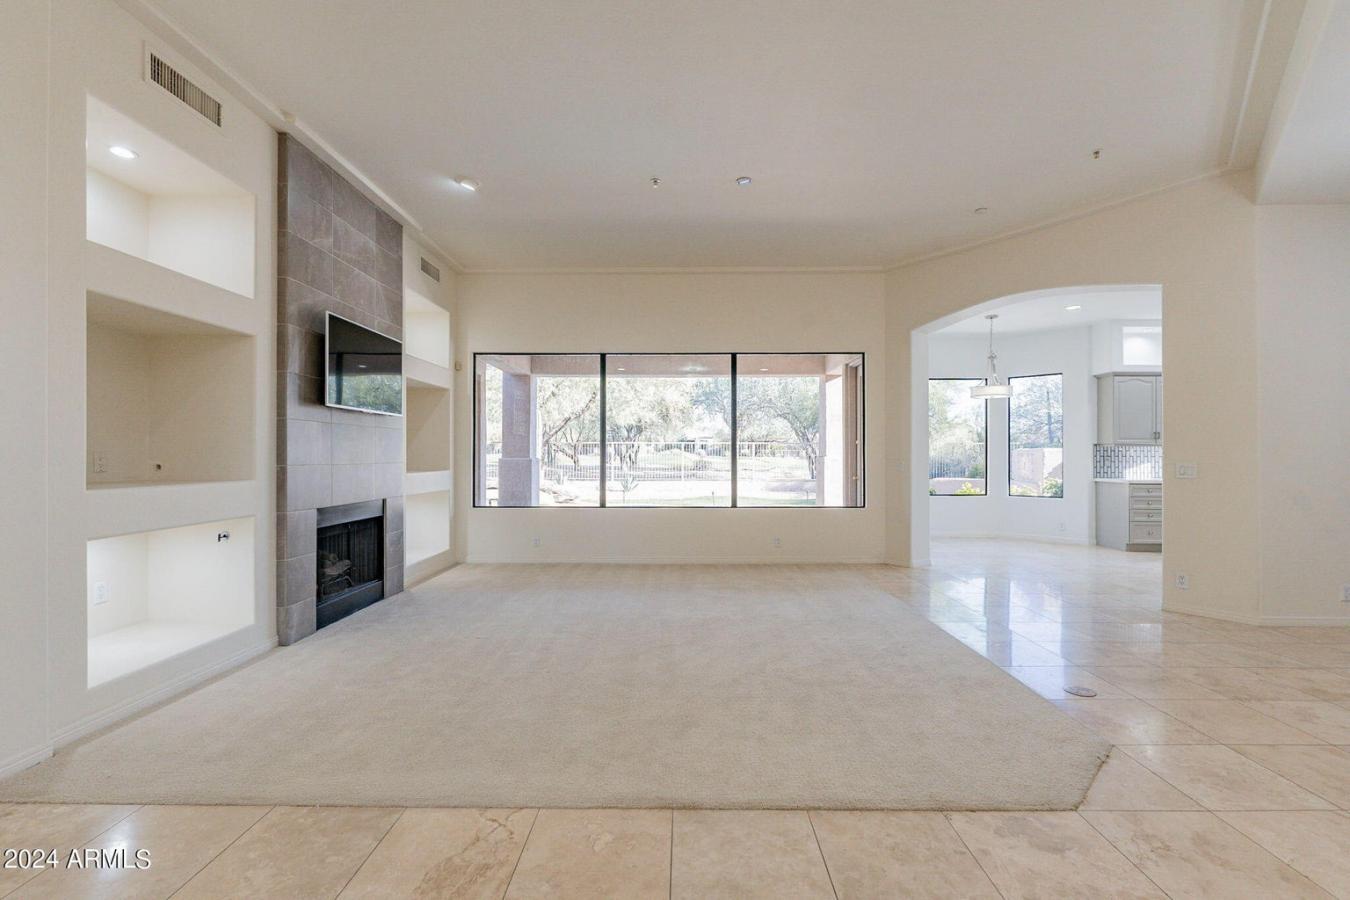 33001 N 68Th Place, Scottsdale, Arizona, 85266, United States, 2 Bedrooms Bedrooms, ,2 BathroomsBathrooms,Residential,For Sale,33001 N 68Th Place,1450430